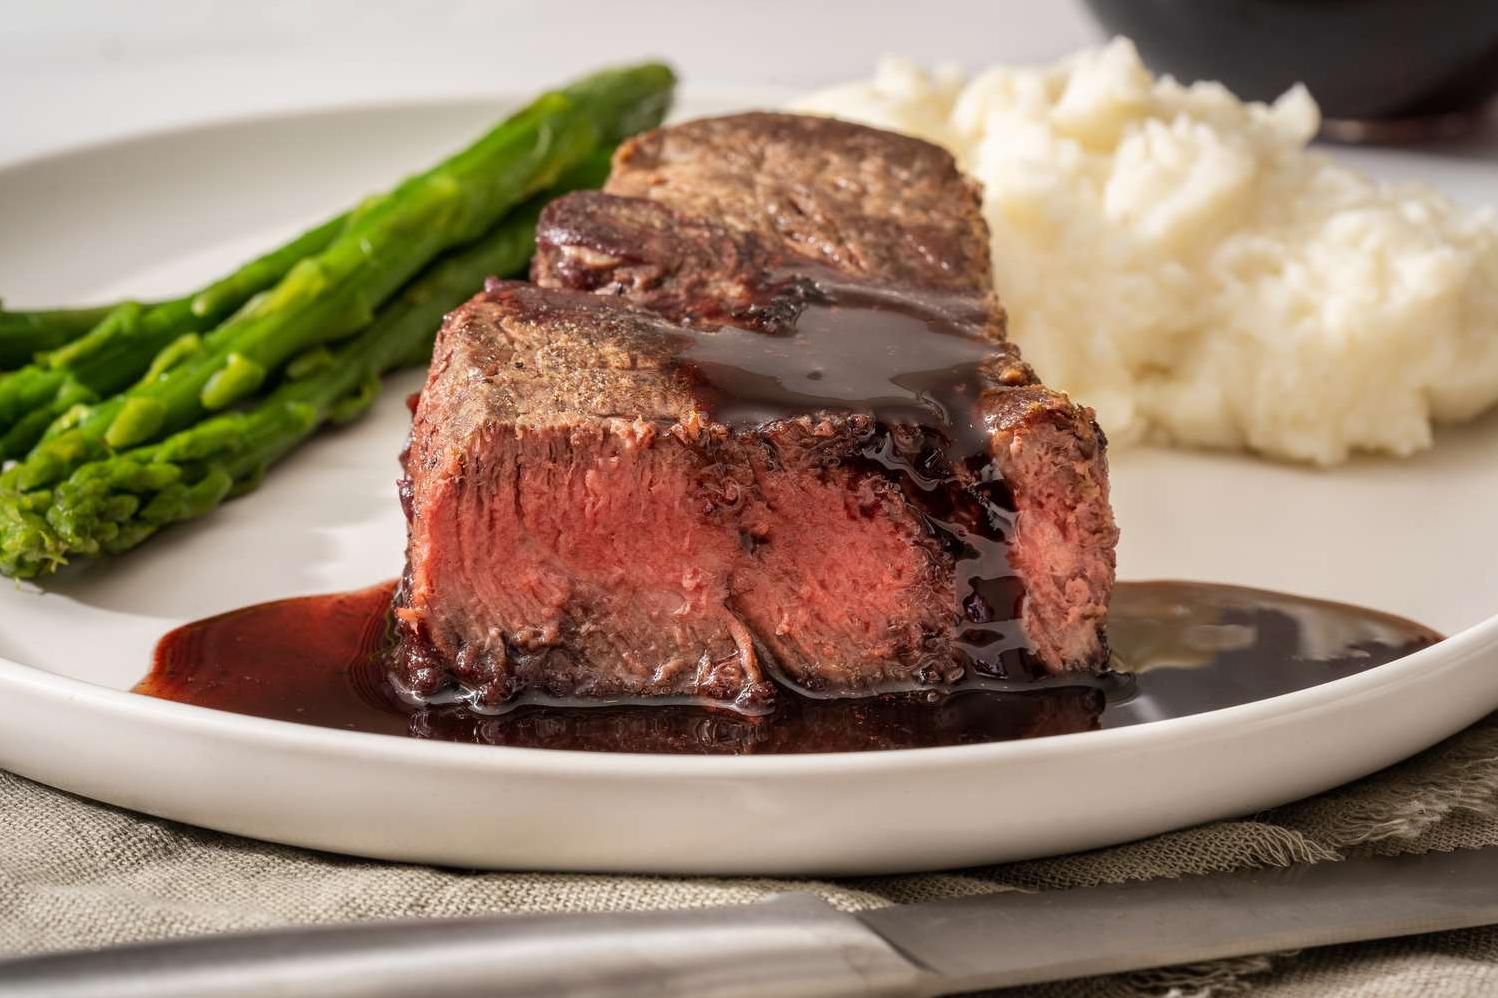  The red wine glaze creates a caramelized crust, giving the steak an extra level of deliciousness.